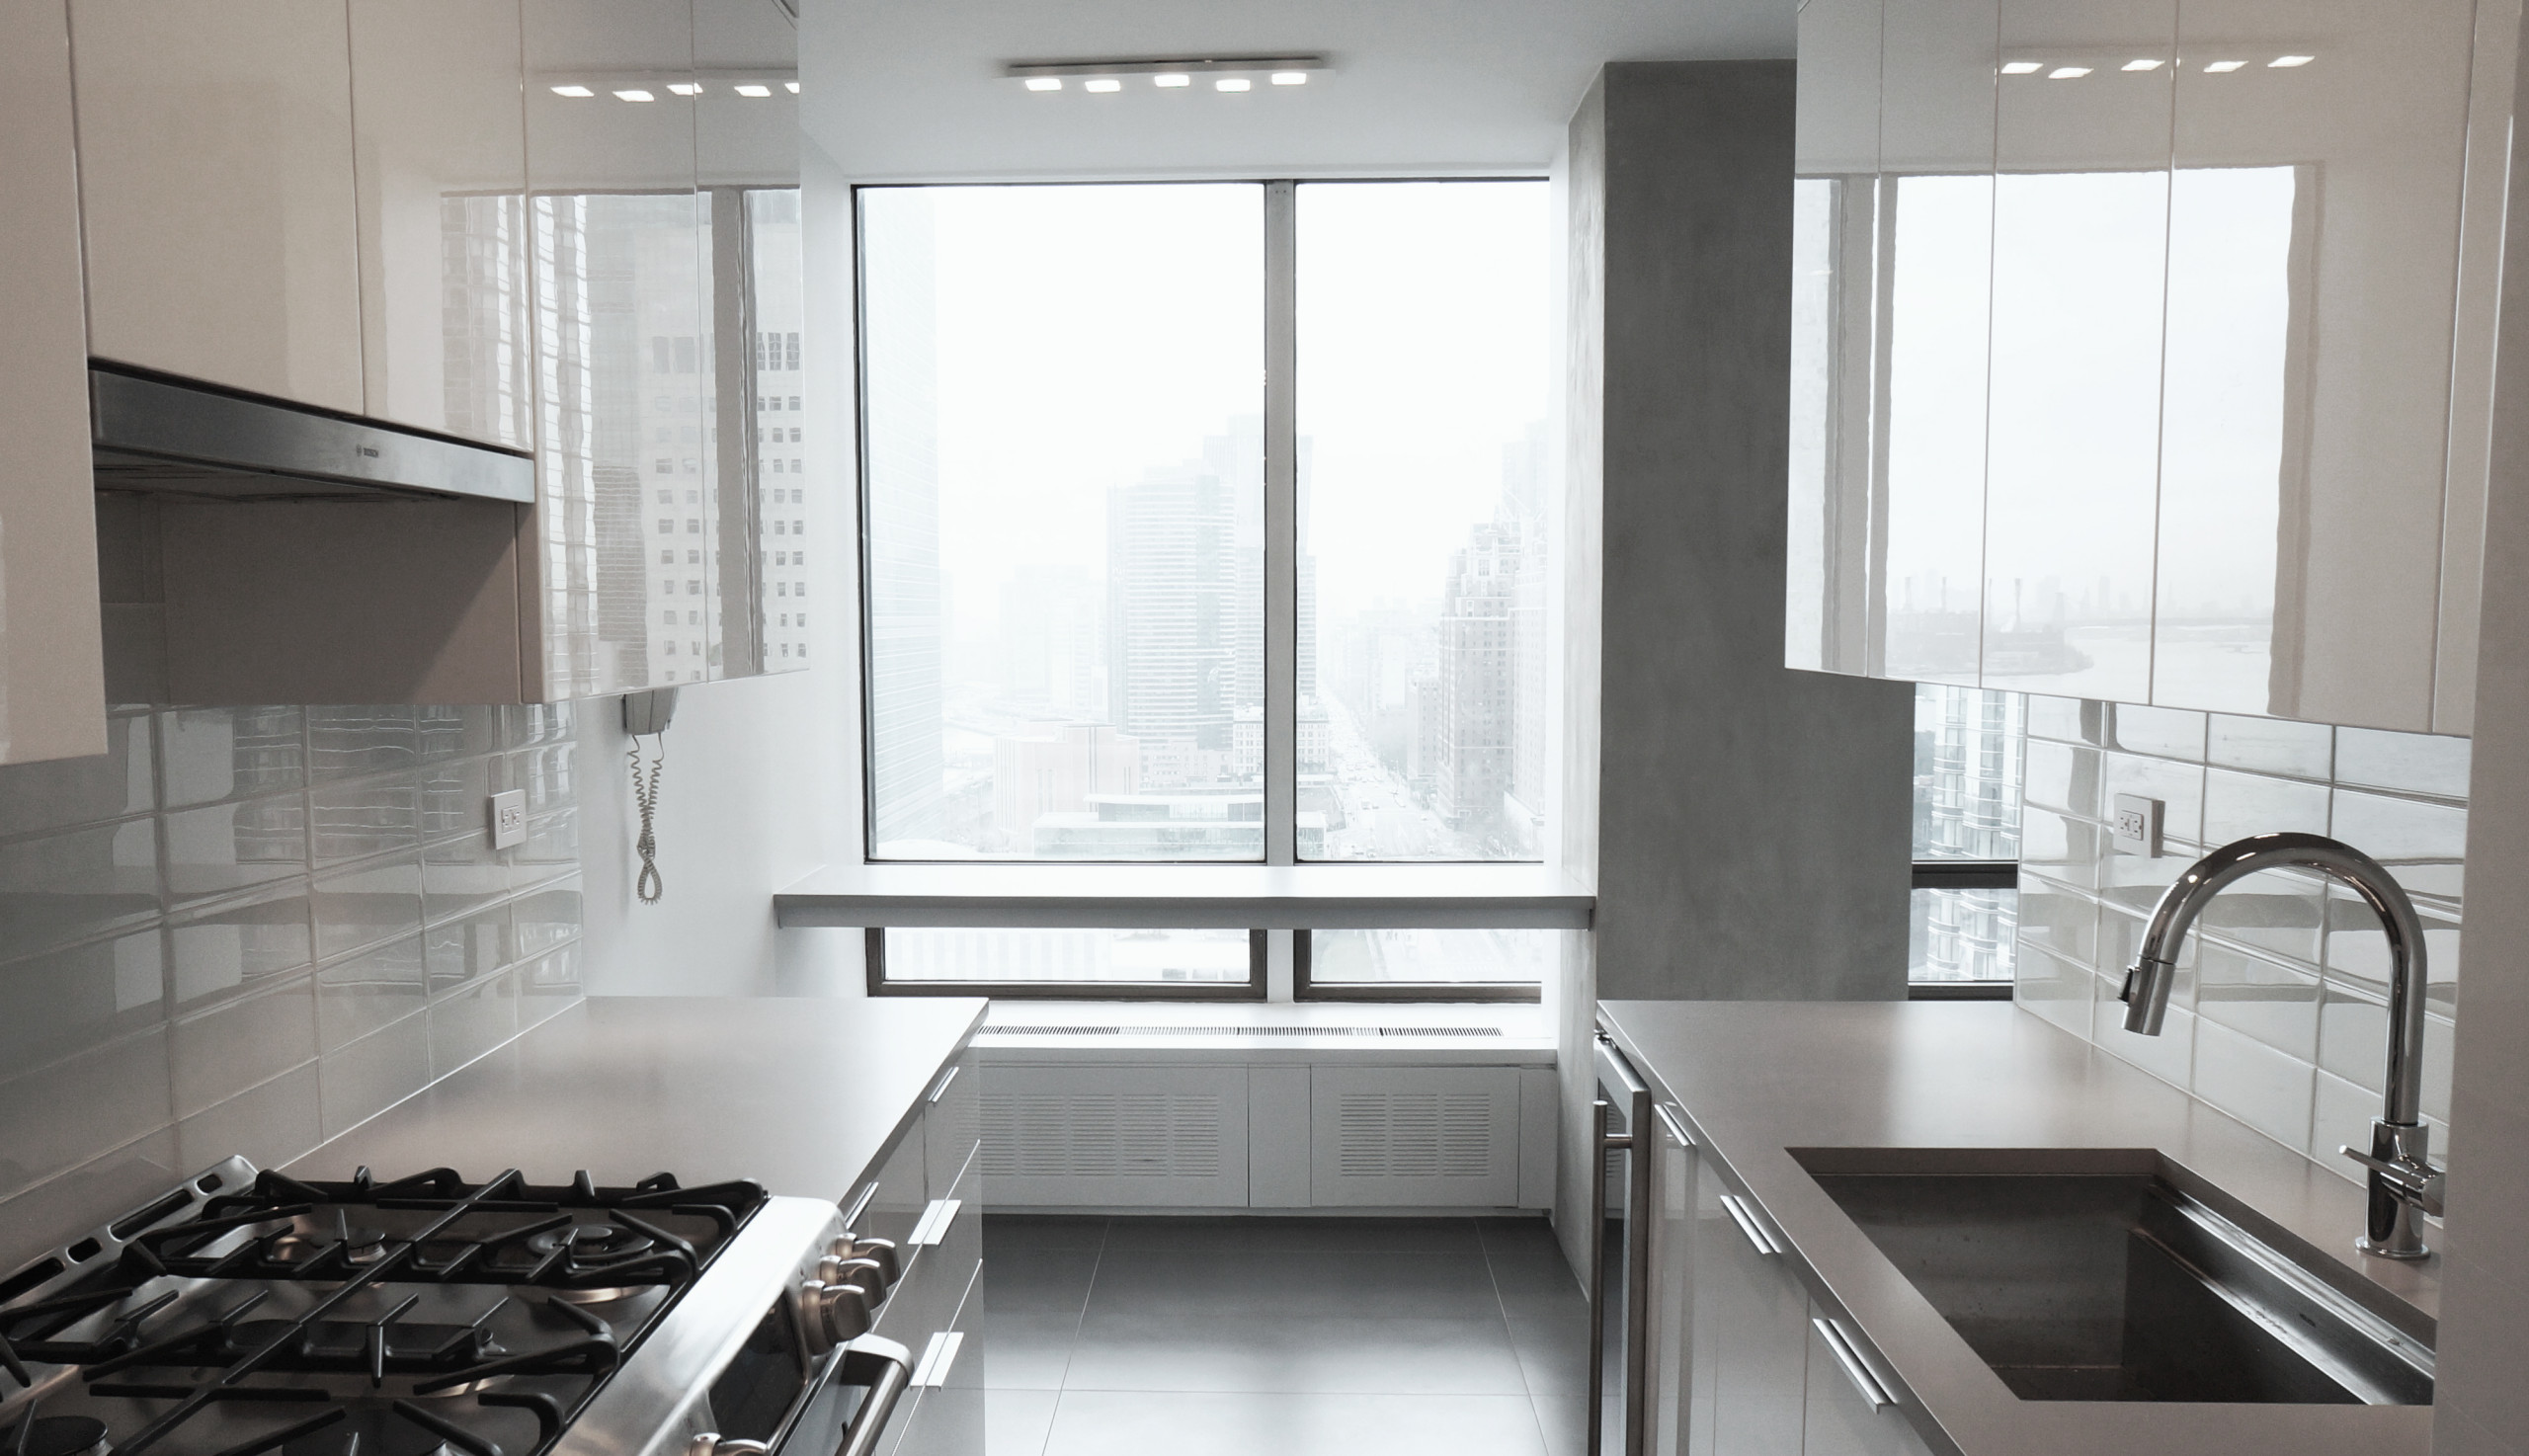 UN Plaza - Midtown East New York - Kitchen with a view